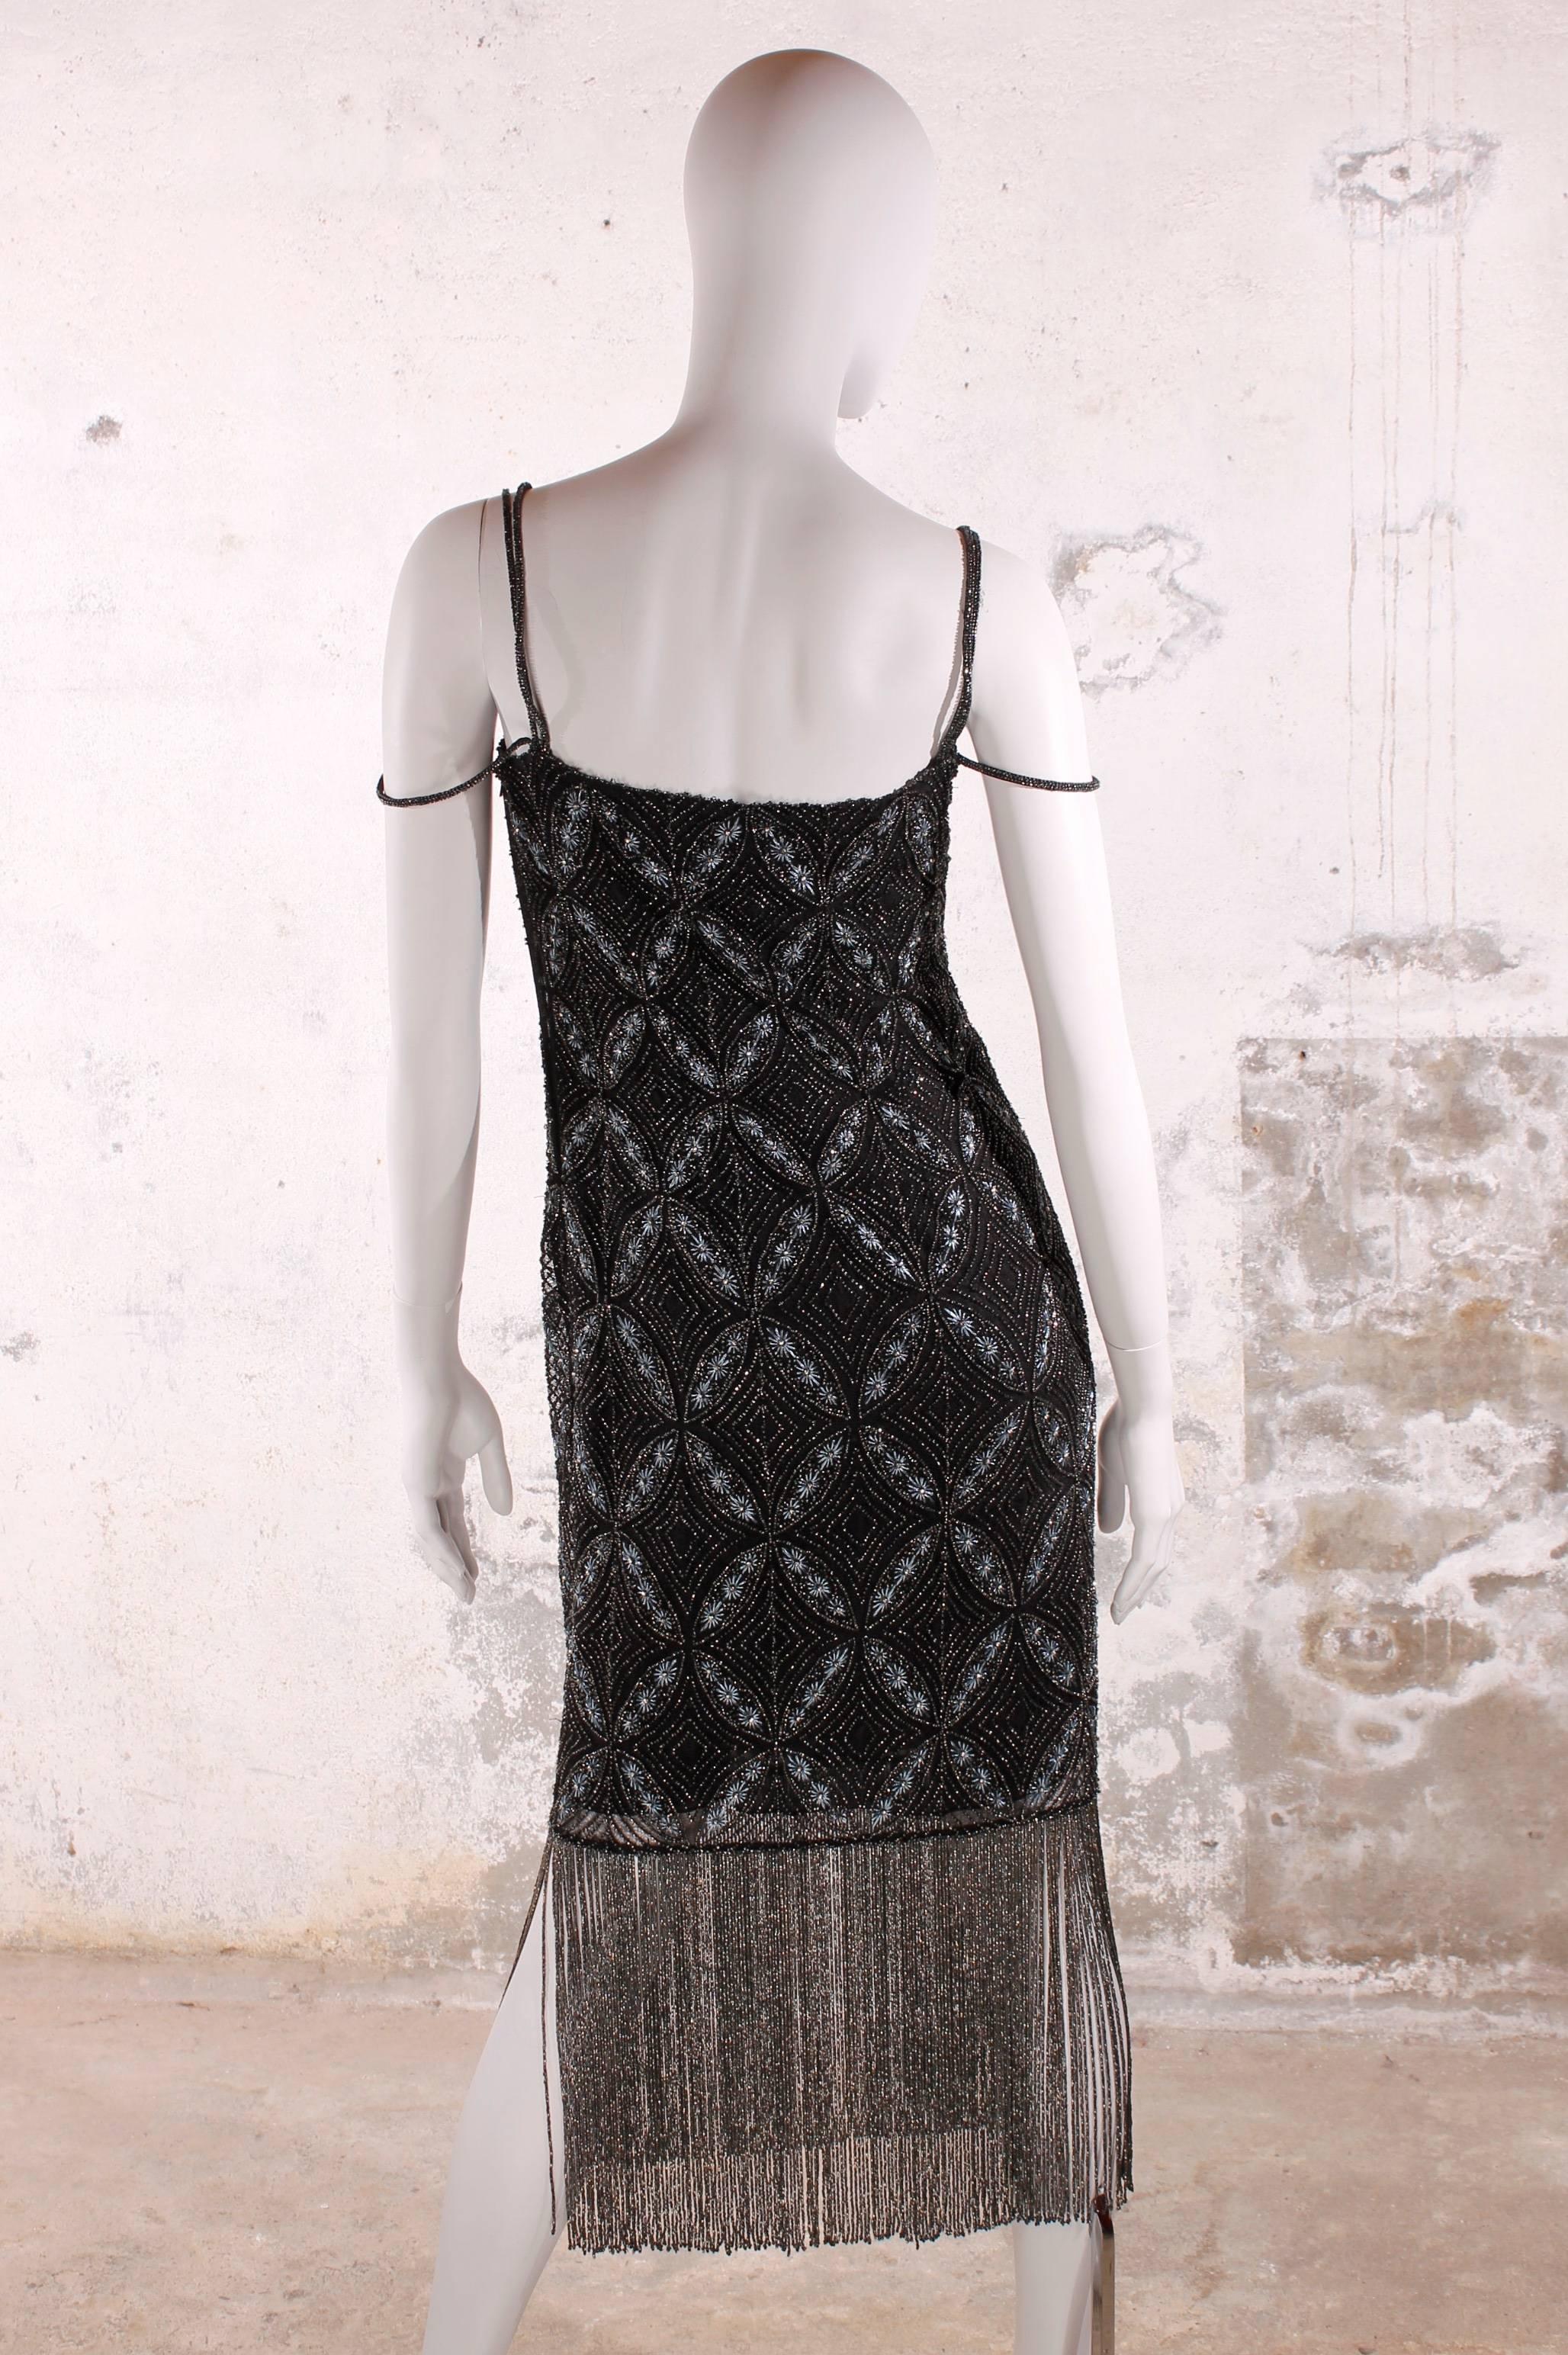 Stunning Christian Dior evening dress with a marvellous pattern, fully covered with beads and embroidery.

Three straps on each shoulder, one of them is supposed to hang down from the shoulder. As to be seen on the picture. The upper layer of the